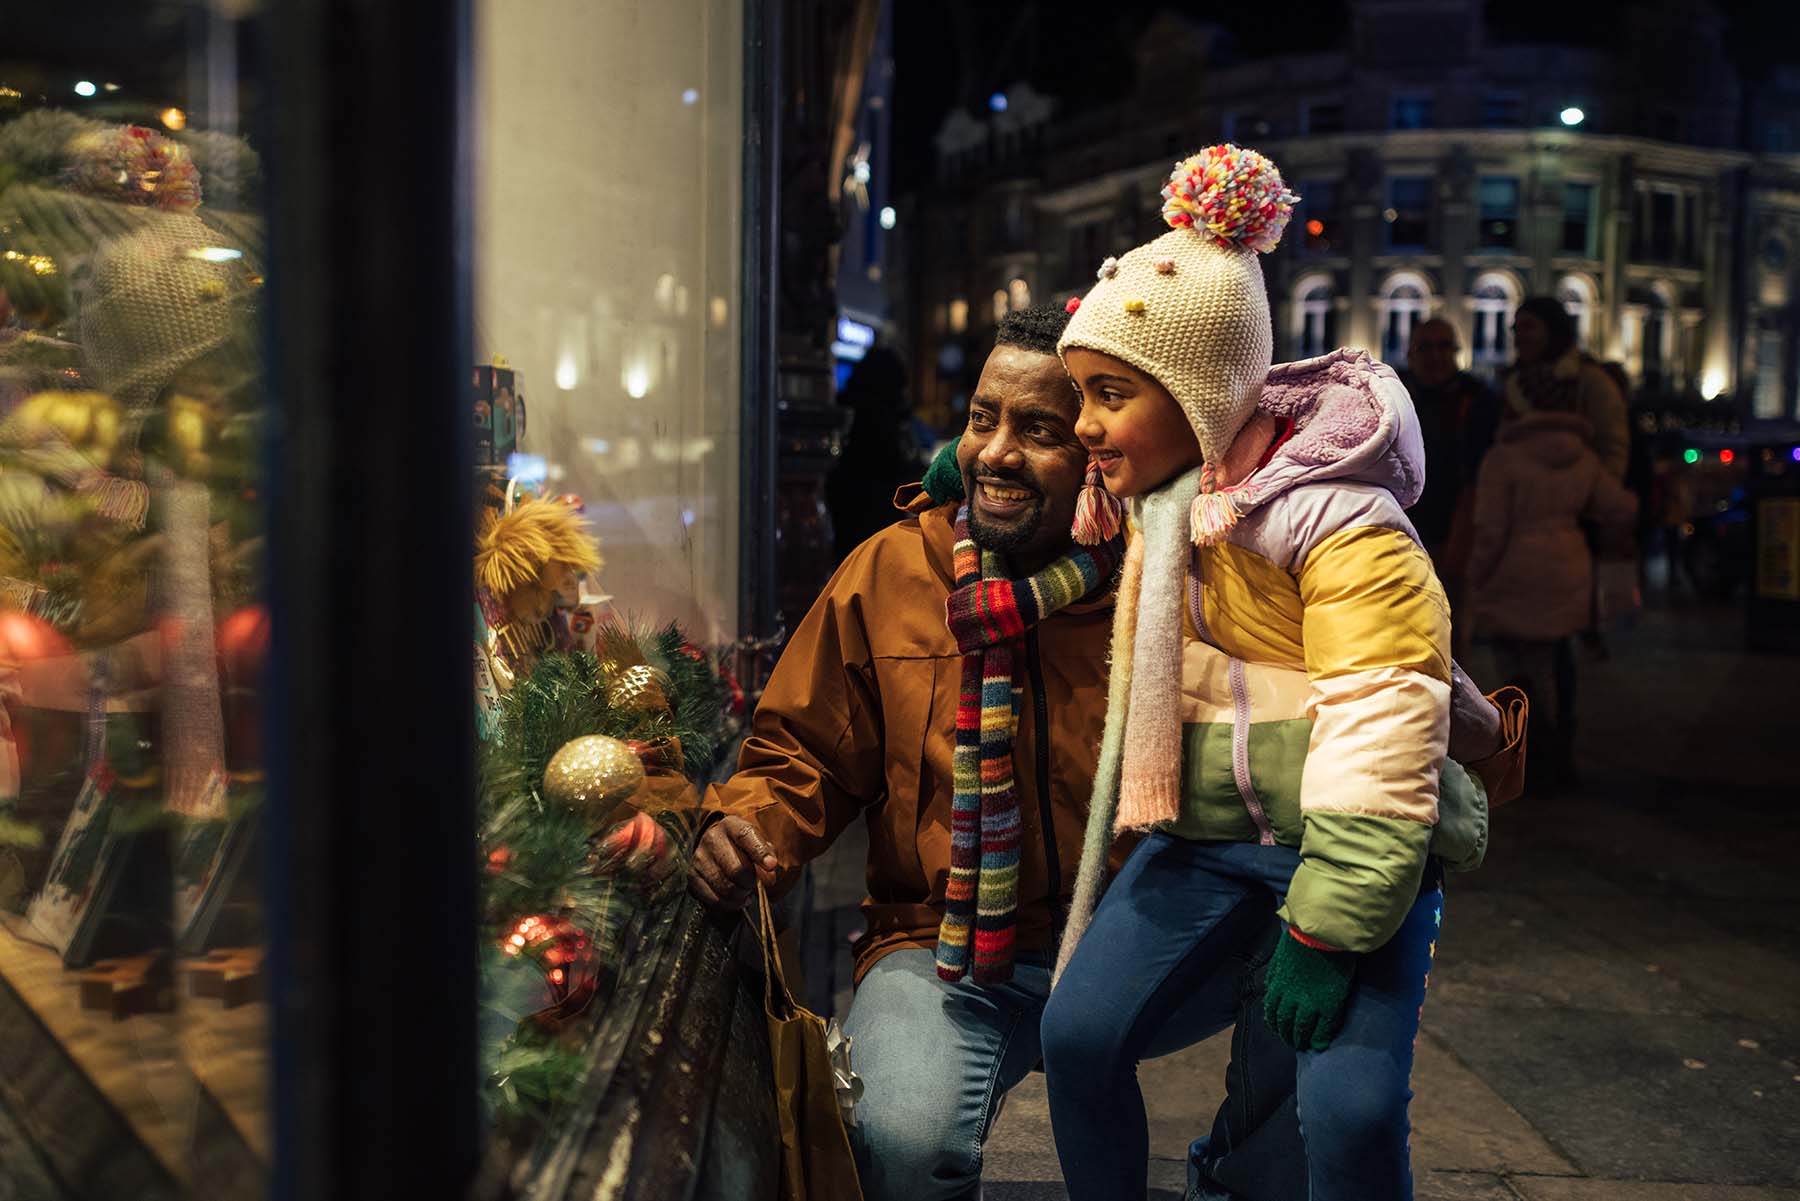 Dad and daughter smiling at a pretty holiday window display in a city with cold weather.